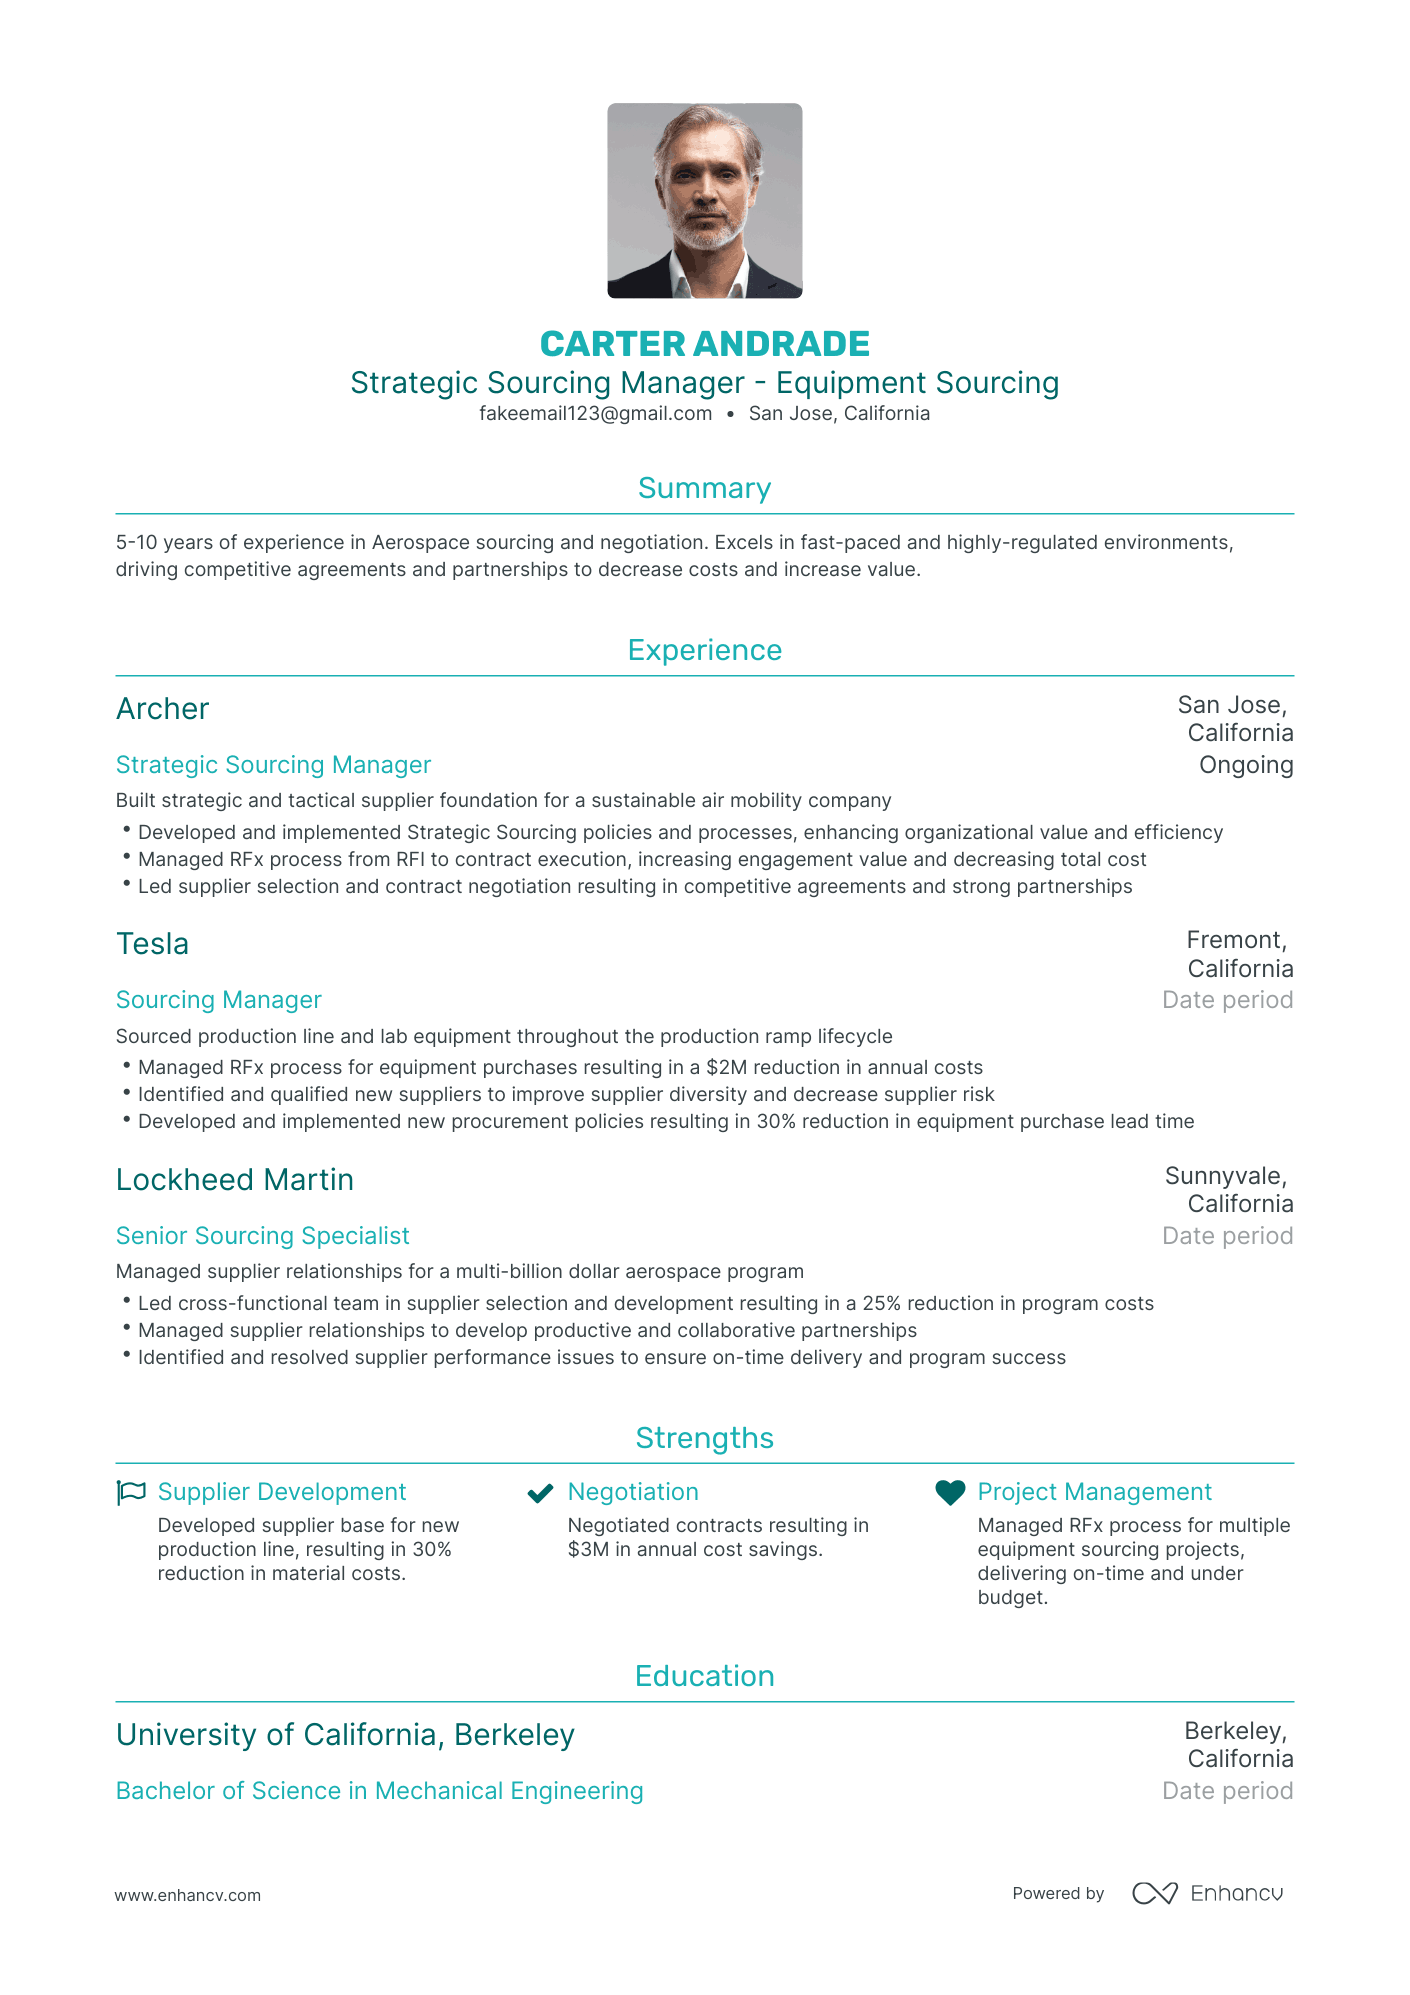 Traditional Strategic Sourcing Manager Resume Template